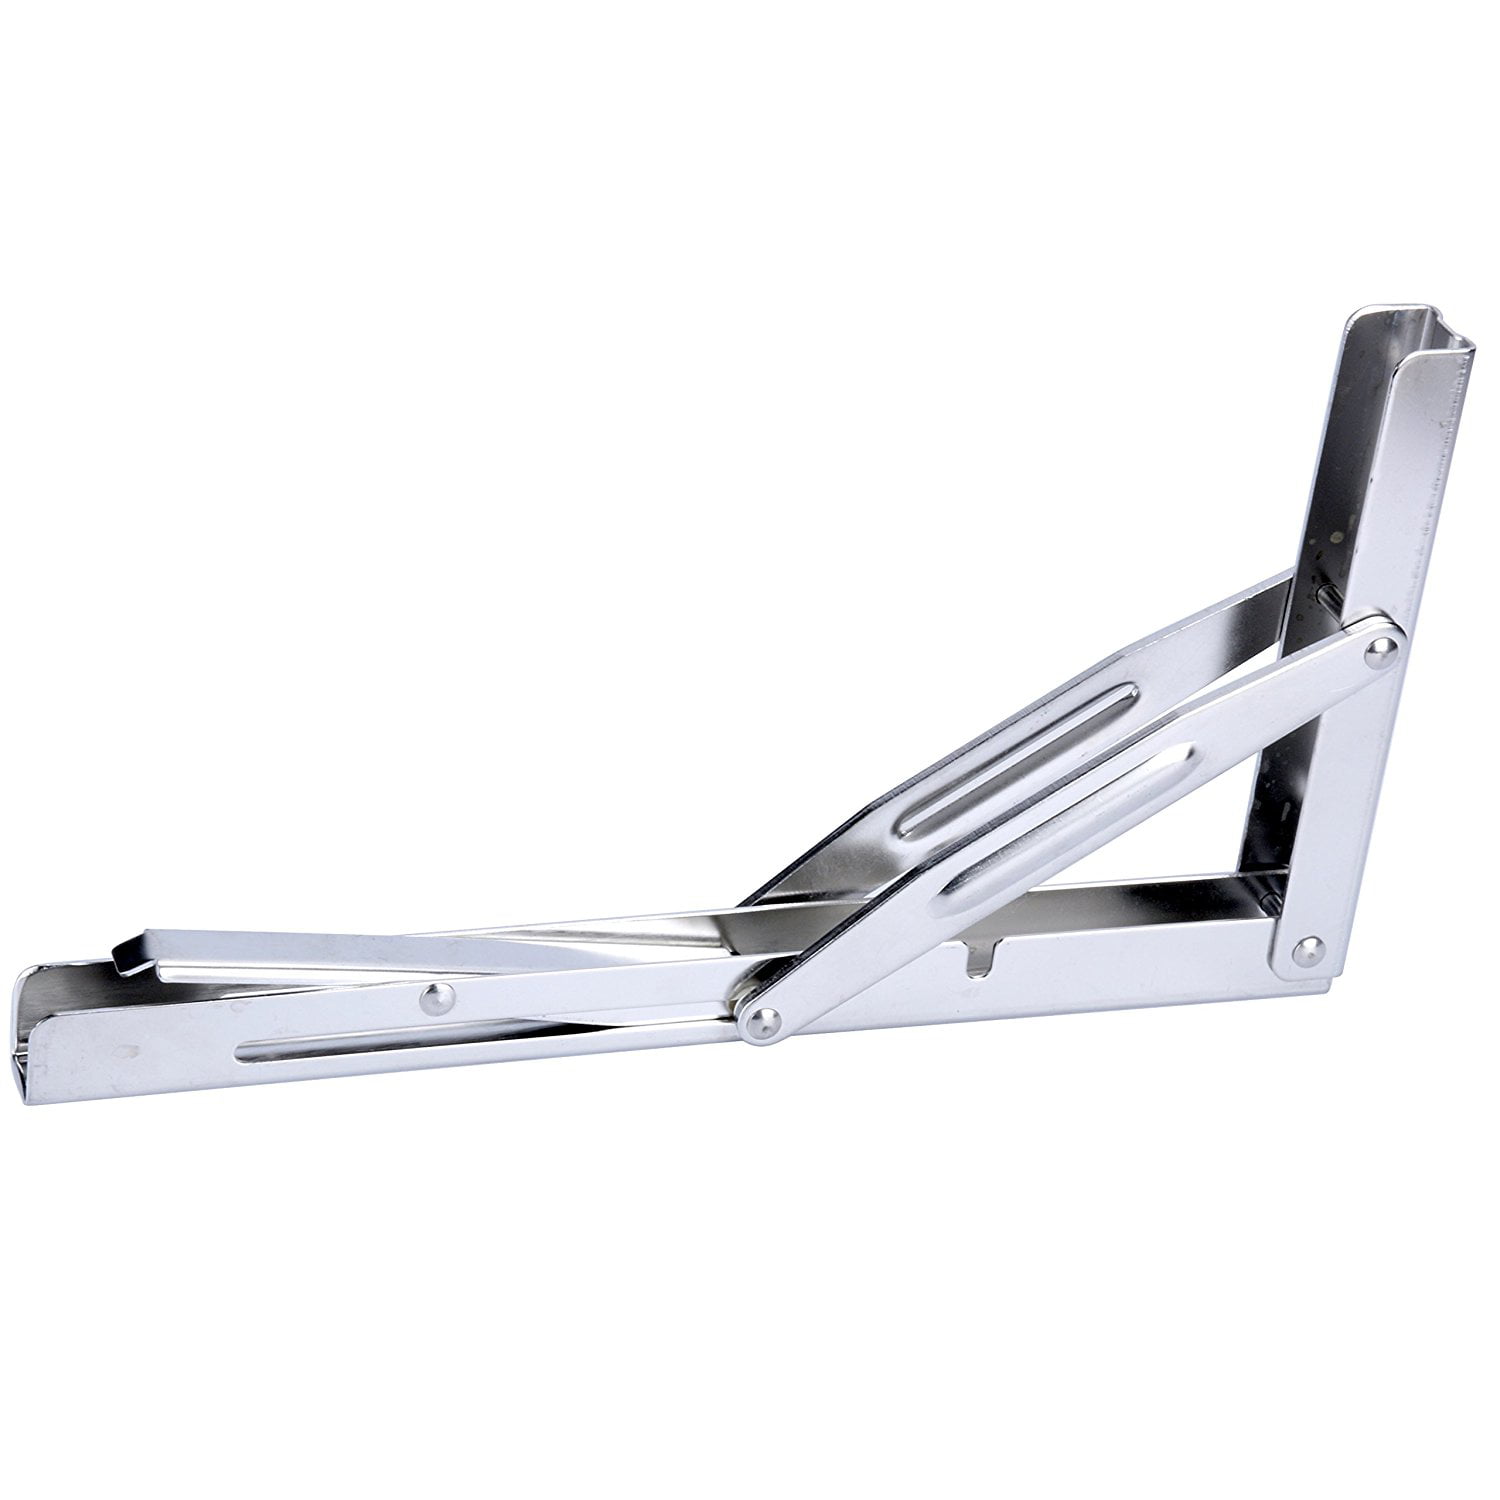 330lb Long Release Arm Amarine-made Long Release Arm Polished Stainless Steel Folding Shelf Bench Table Folding Shelf or Bracket Max Load